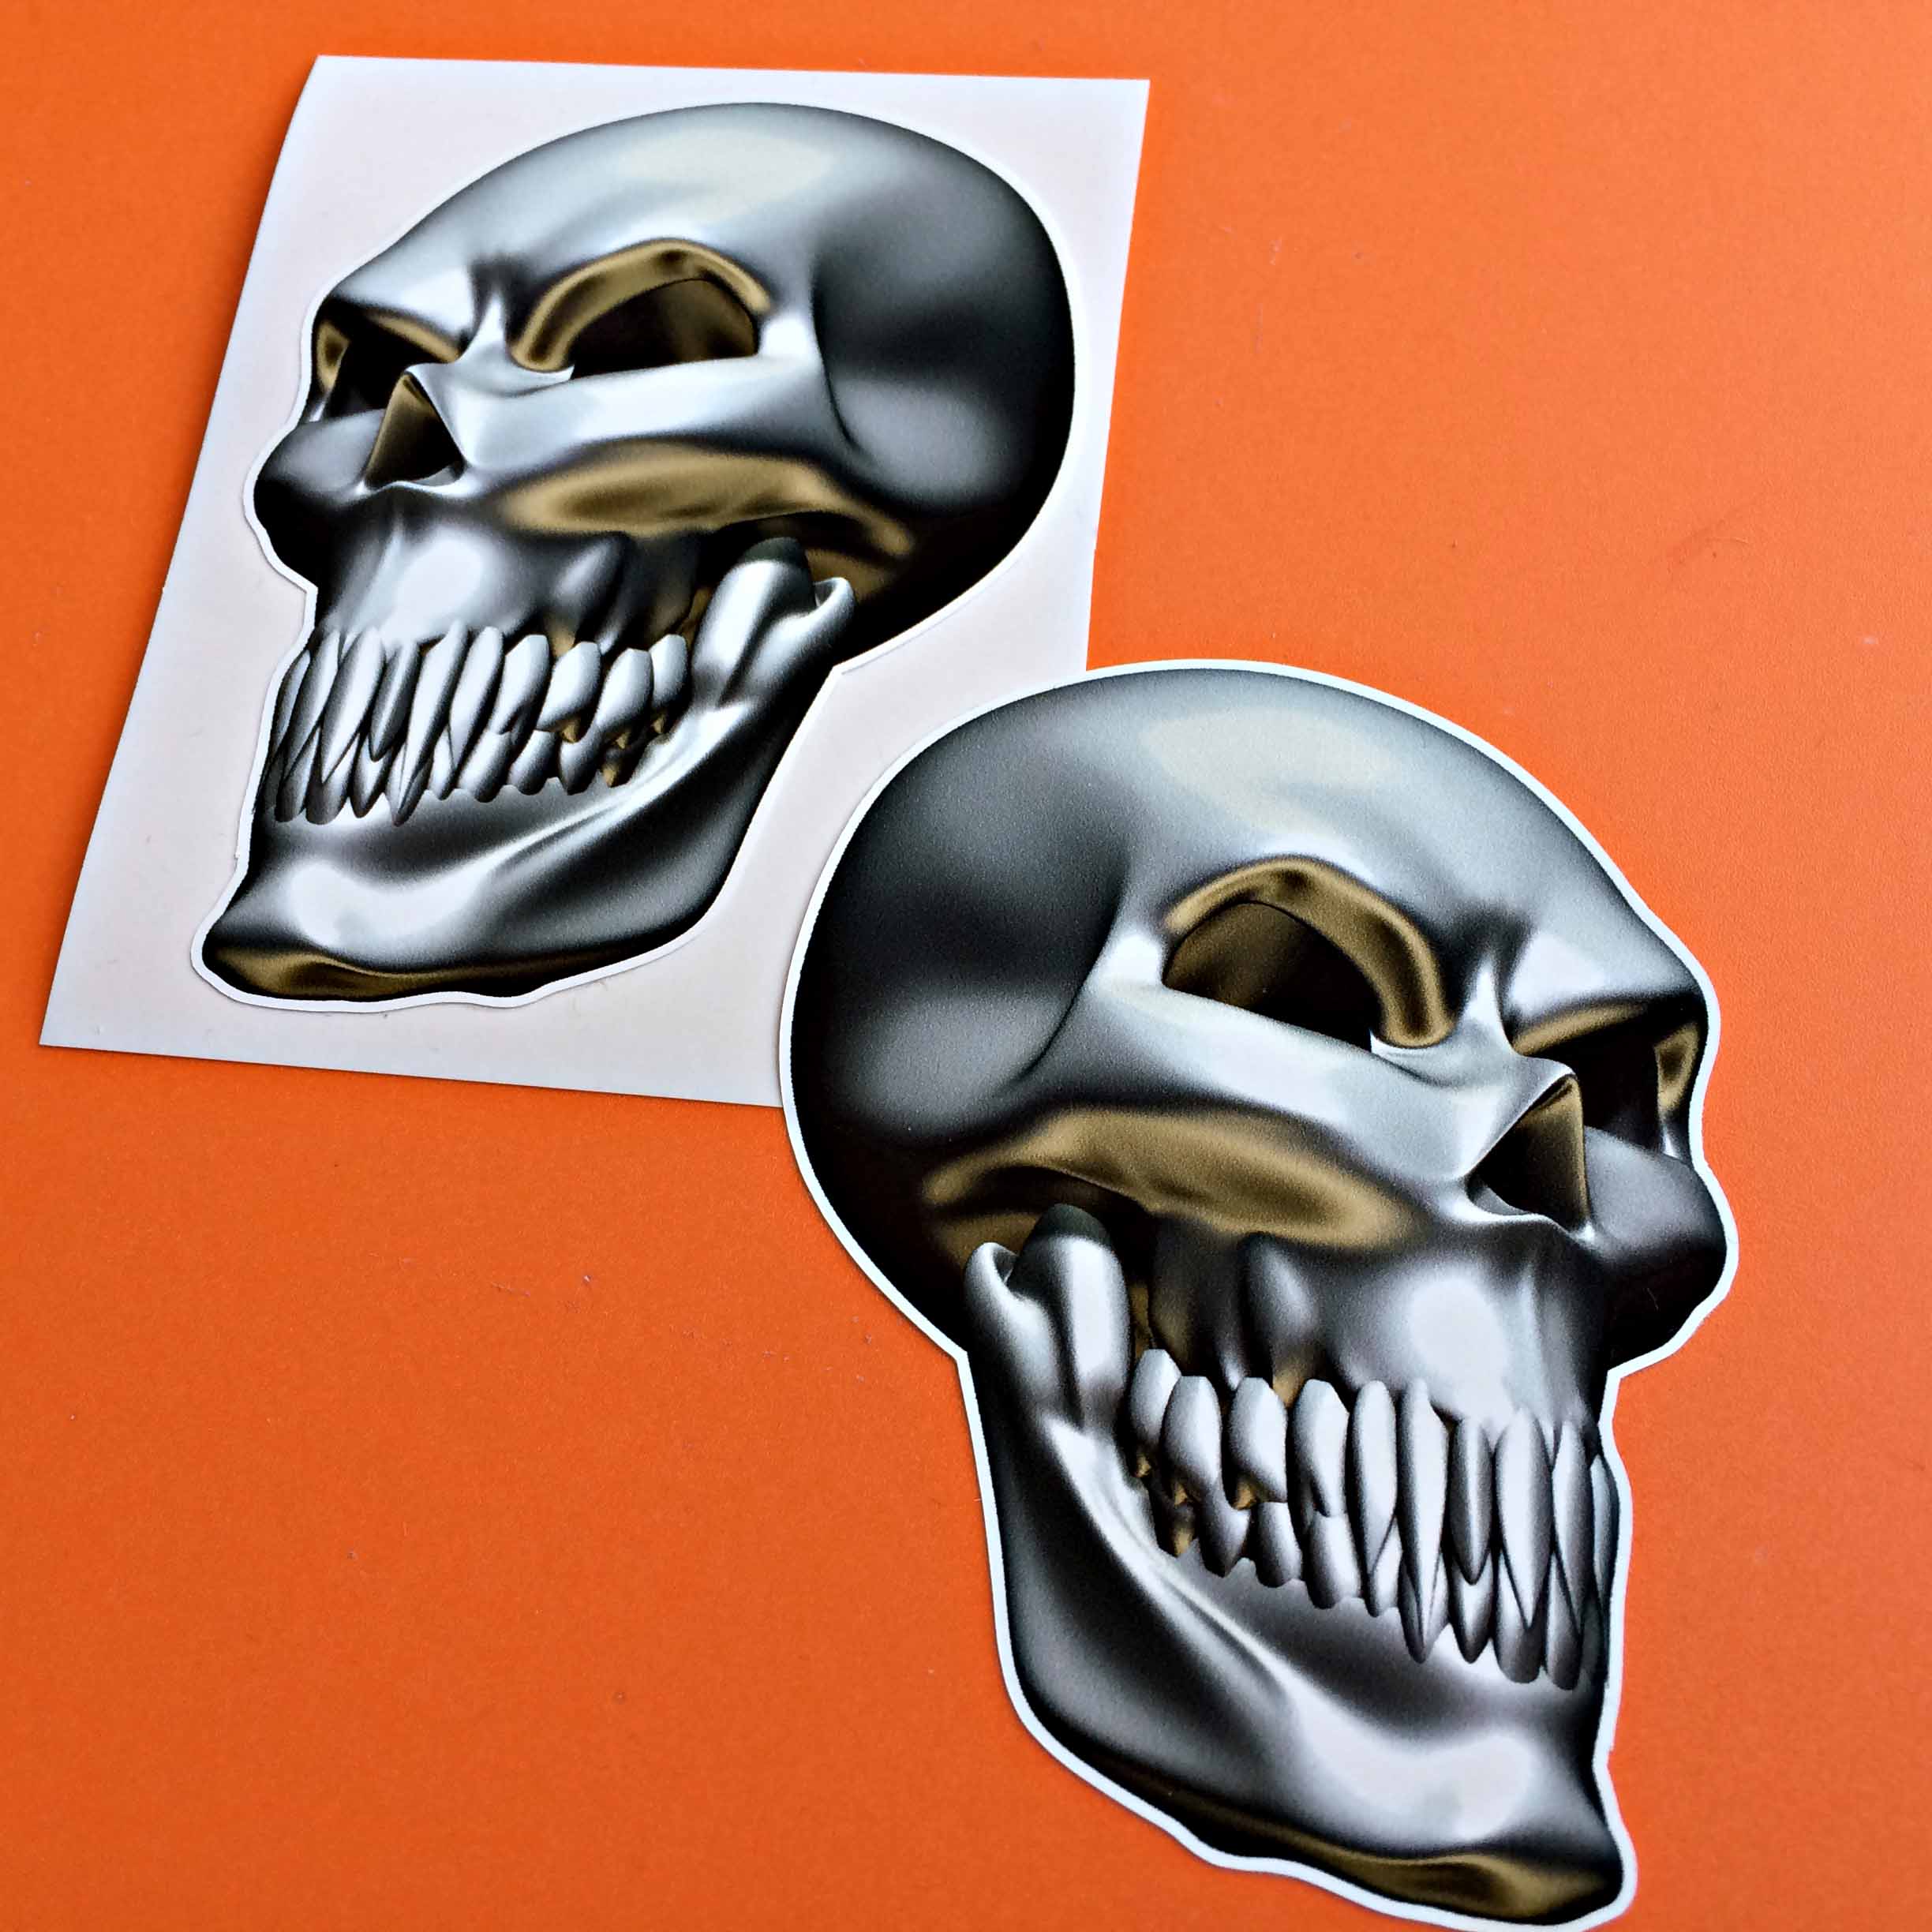 METAL SKULL STICKERS. Partial side view of a metal skull with teeth. The eye socket and cheekbone area is gold.